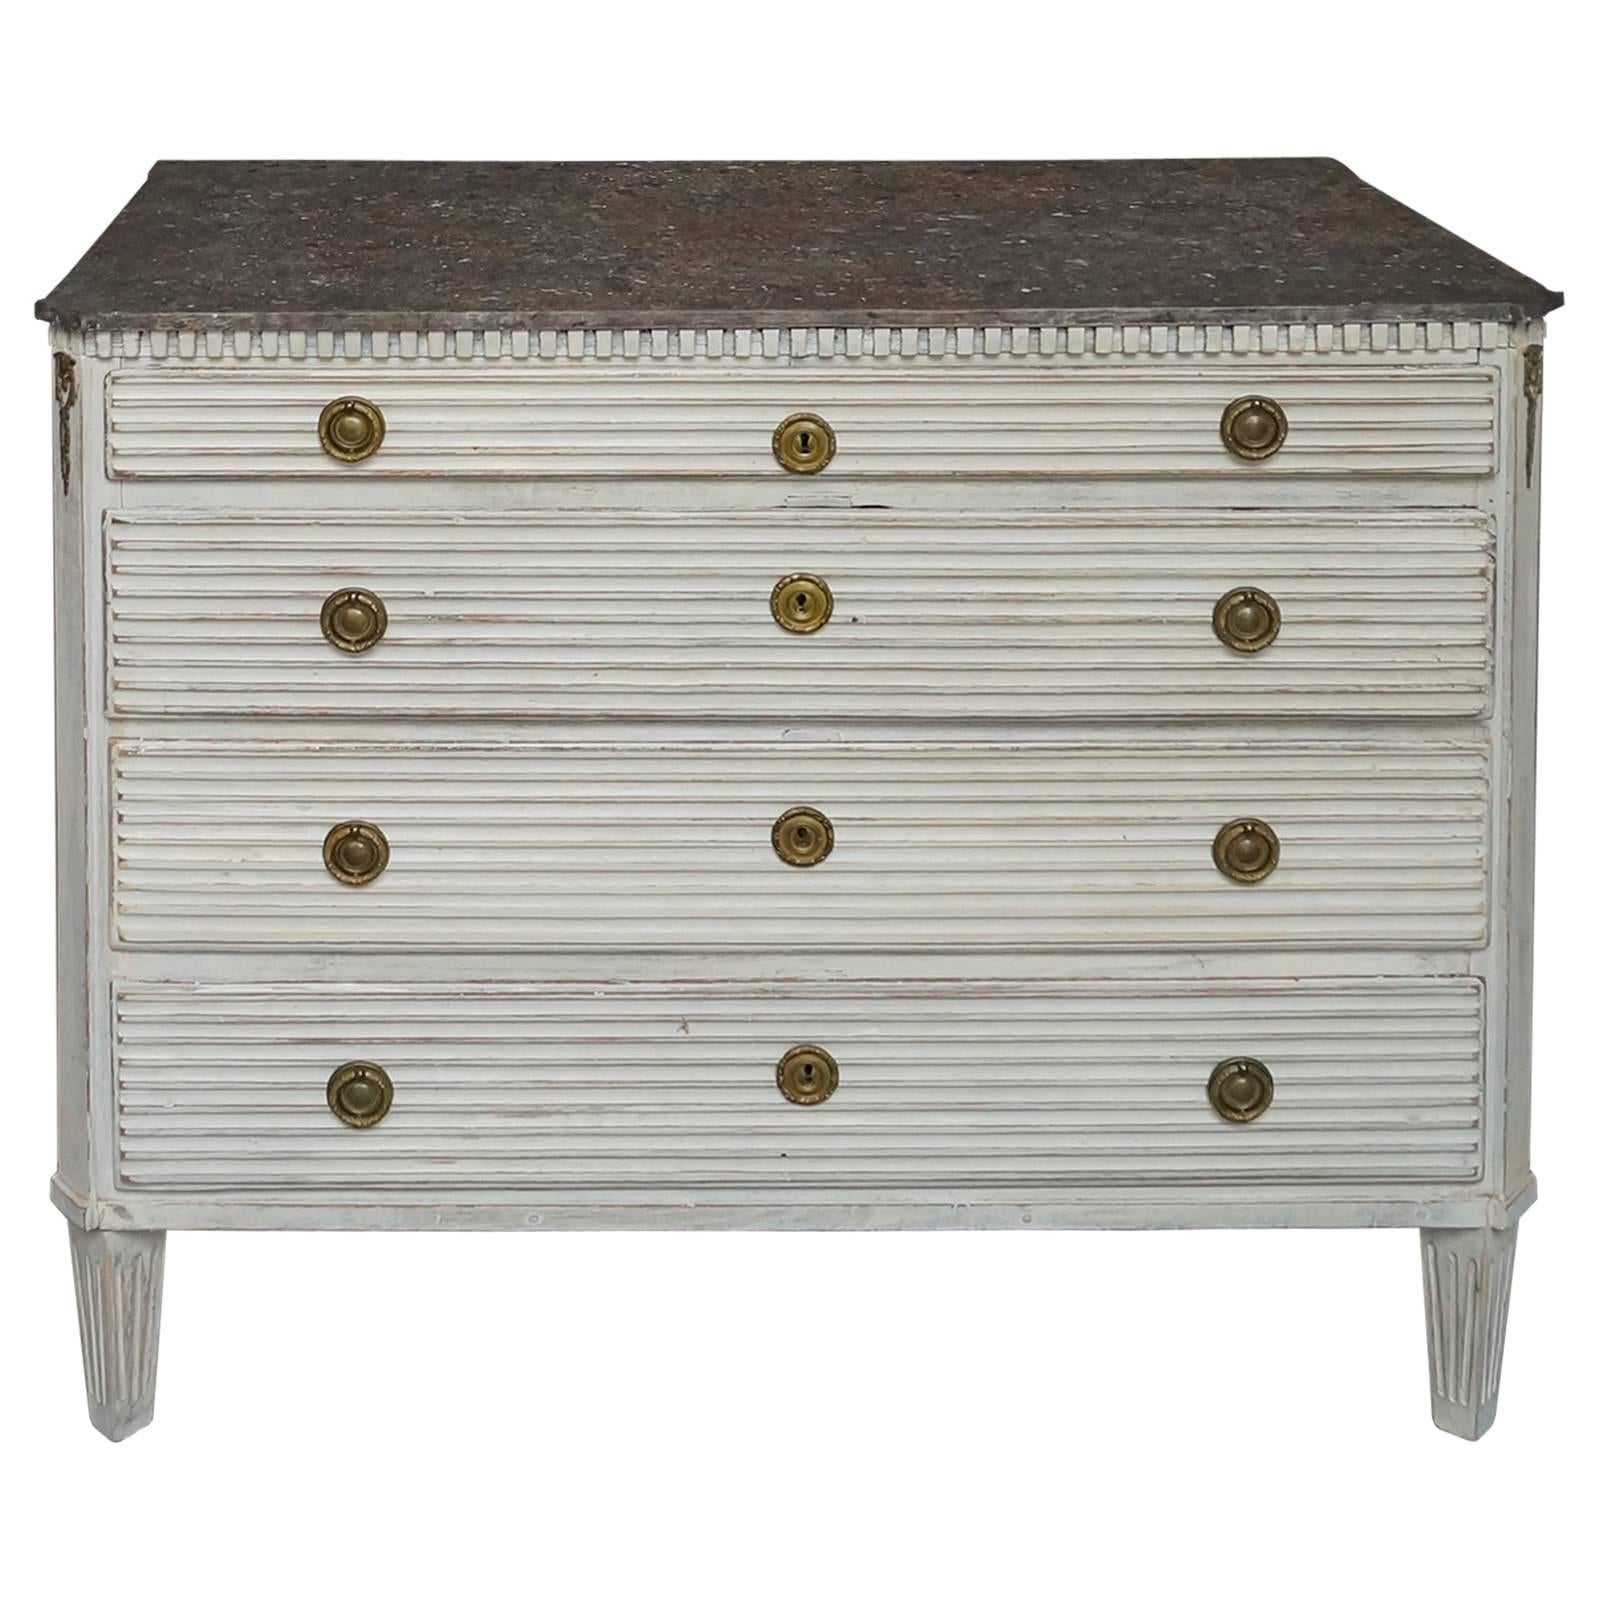 Period Gustavian Chest of Drawers For Sale